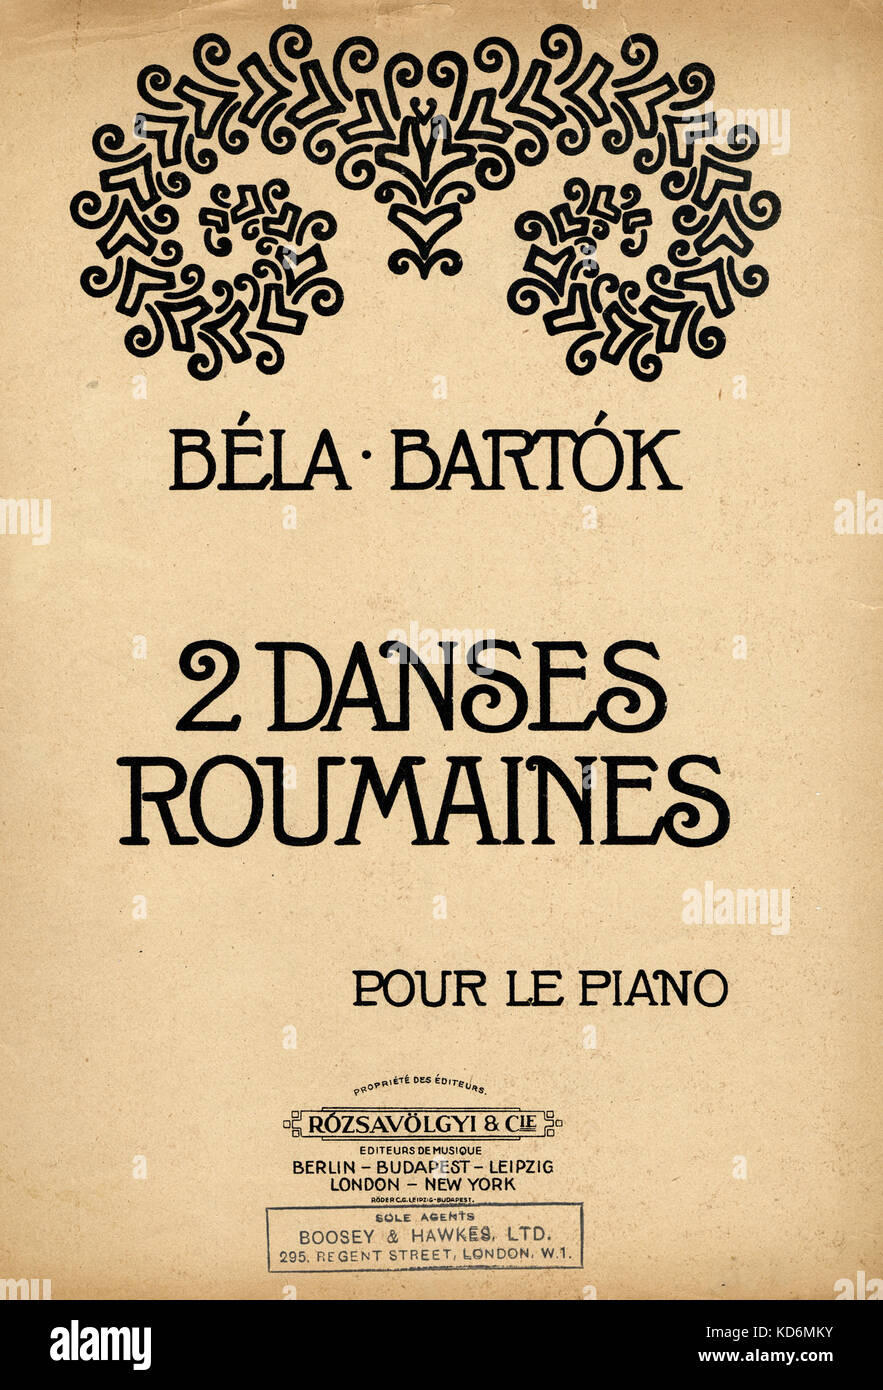 Score cover of Bela Bartok 's ' 2 Danses Roumaines' Two Roumanian Dances for the piano. Budapest, Rozsavolgyi, 1910.   Hungarian composer & pianist, 25 March 1881 - 26 September 1945 Stock Photo